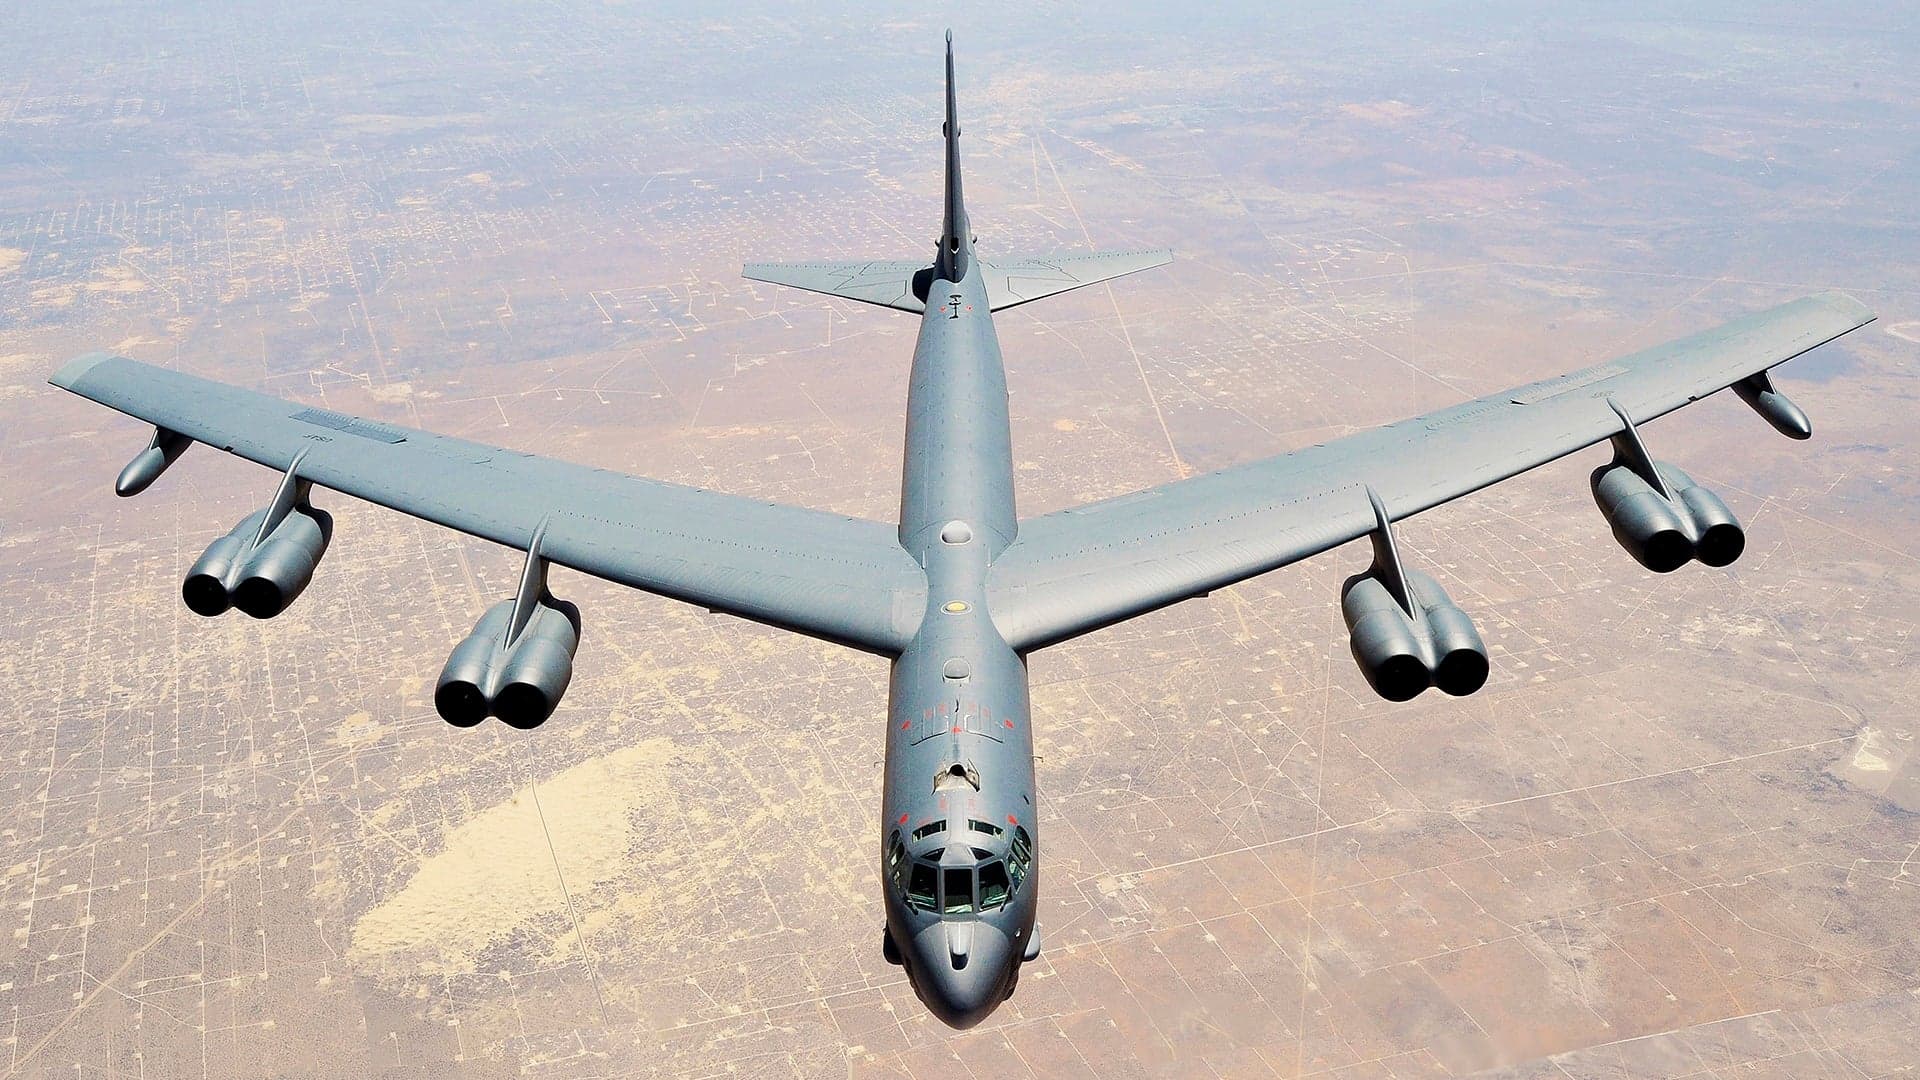 Air Force Offers First Details Of Future Plans For An Upgraded B-52J Bomber